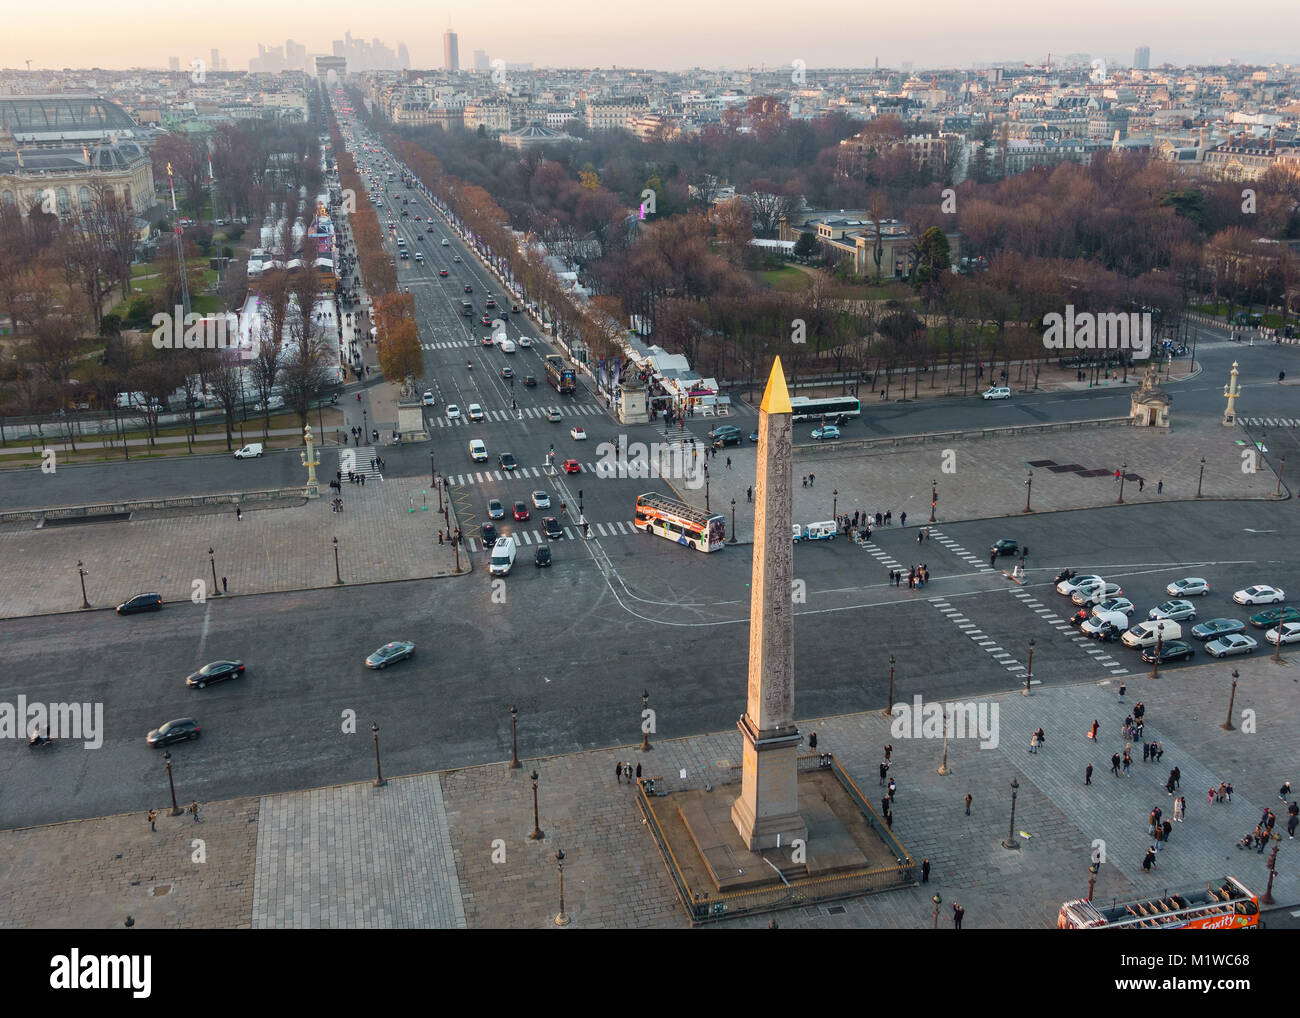 Place de la Concorde and the Champs-Elysees aerial view from the ferris wheel at sunset in Paris, France Stock Photo